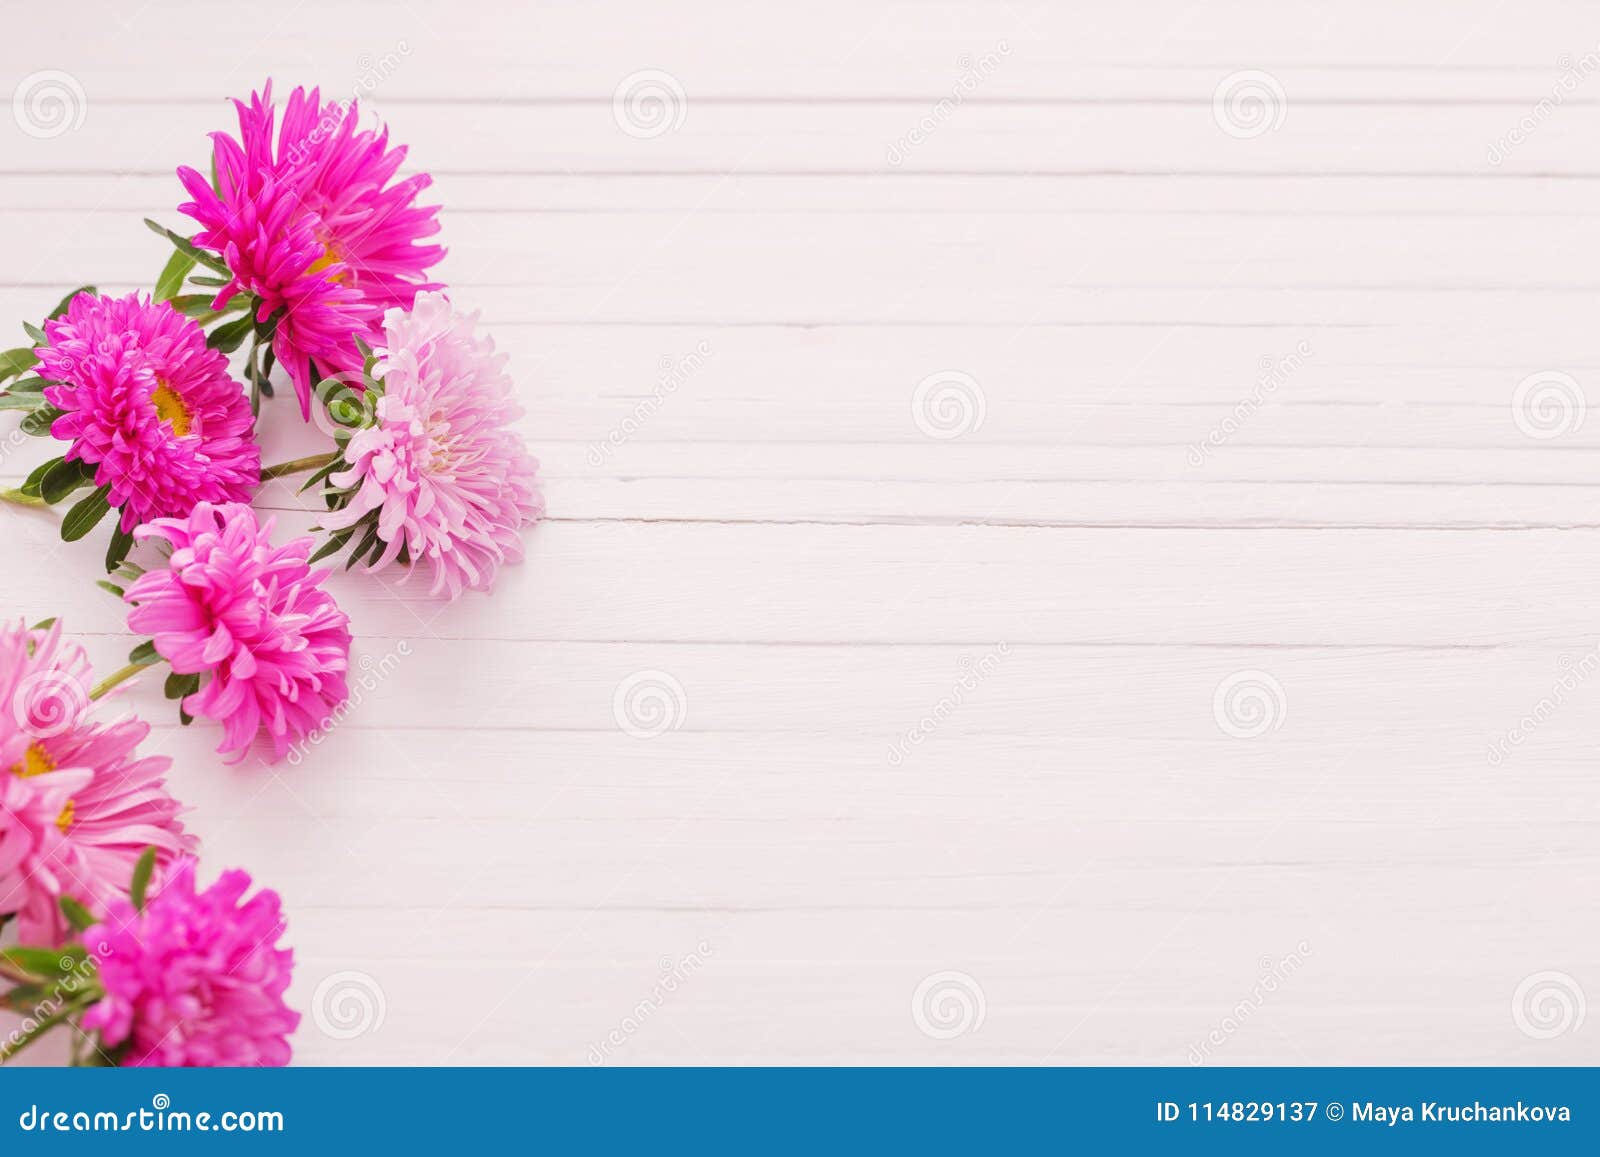 Asters On White Wooden Background Stock Image Image Of Pattern Blossom 114829137